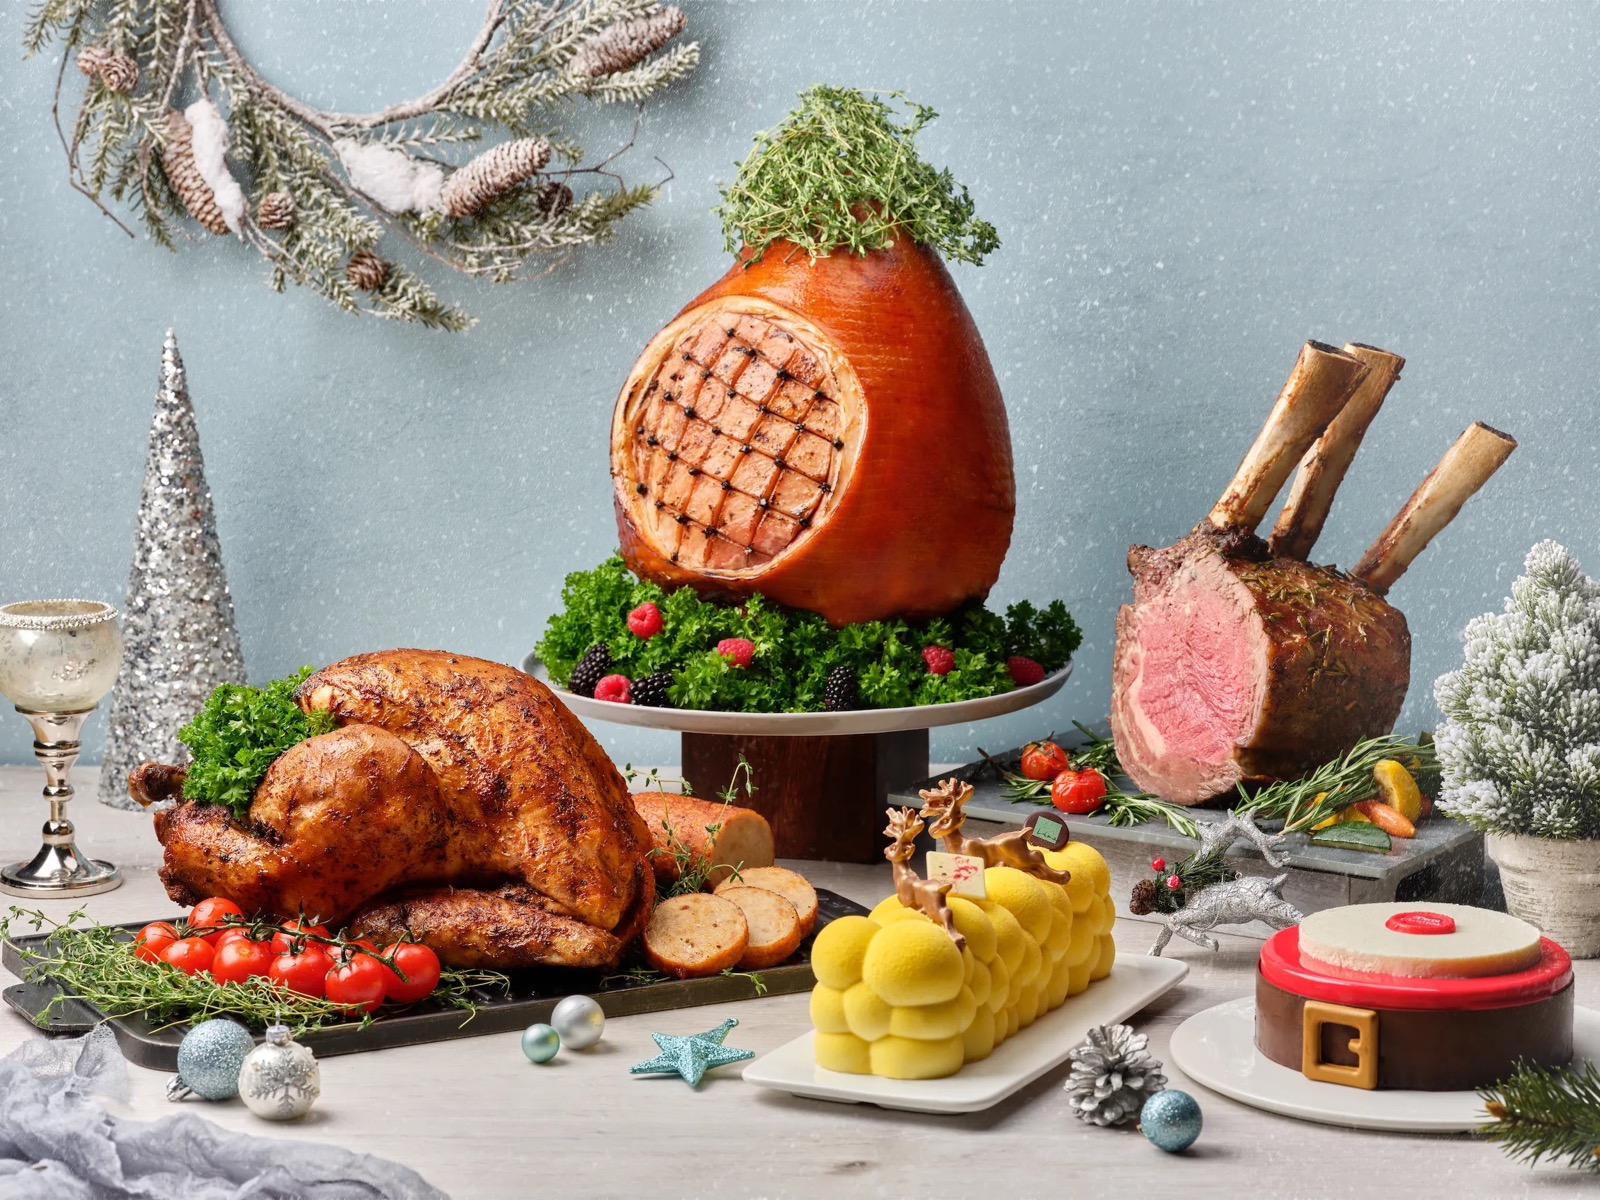 It’s Time to Find Out What Your 🥳 Holiday Vibe Is With the 🎄 Christmas Feast You Plan Christmas feast meats